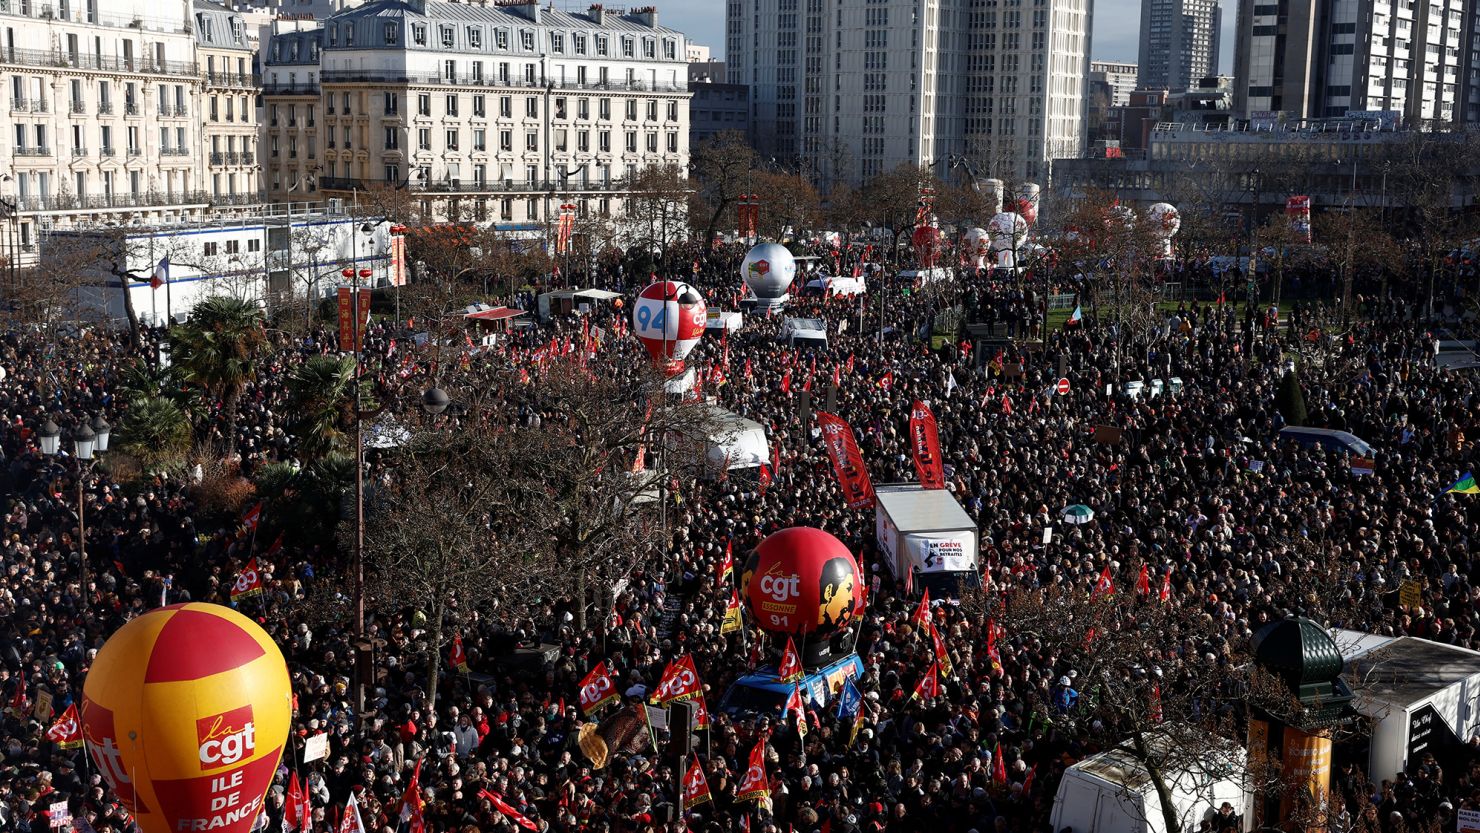 Protesters gather at Place d'Italie in Paris during a demonstration against the French government's pension reform plan on January 31, 2023.